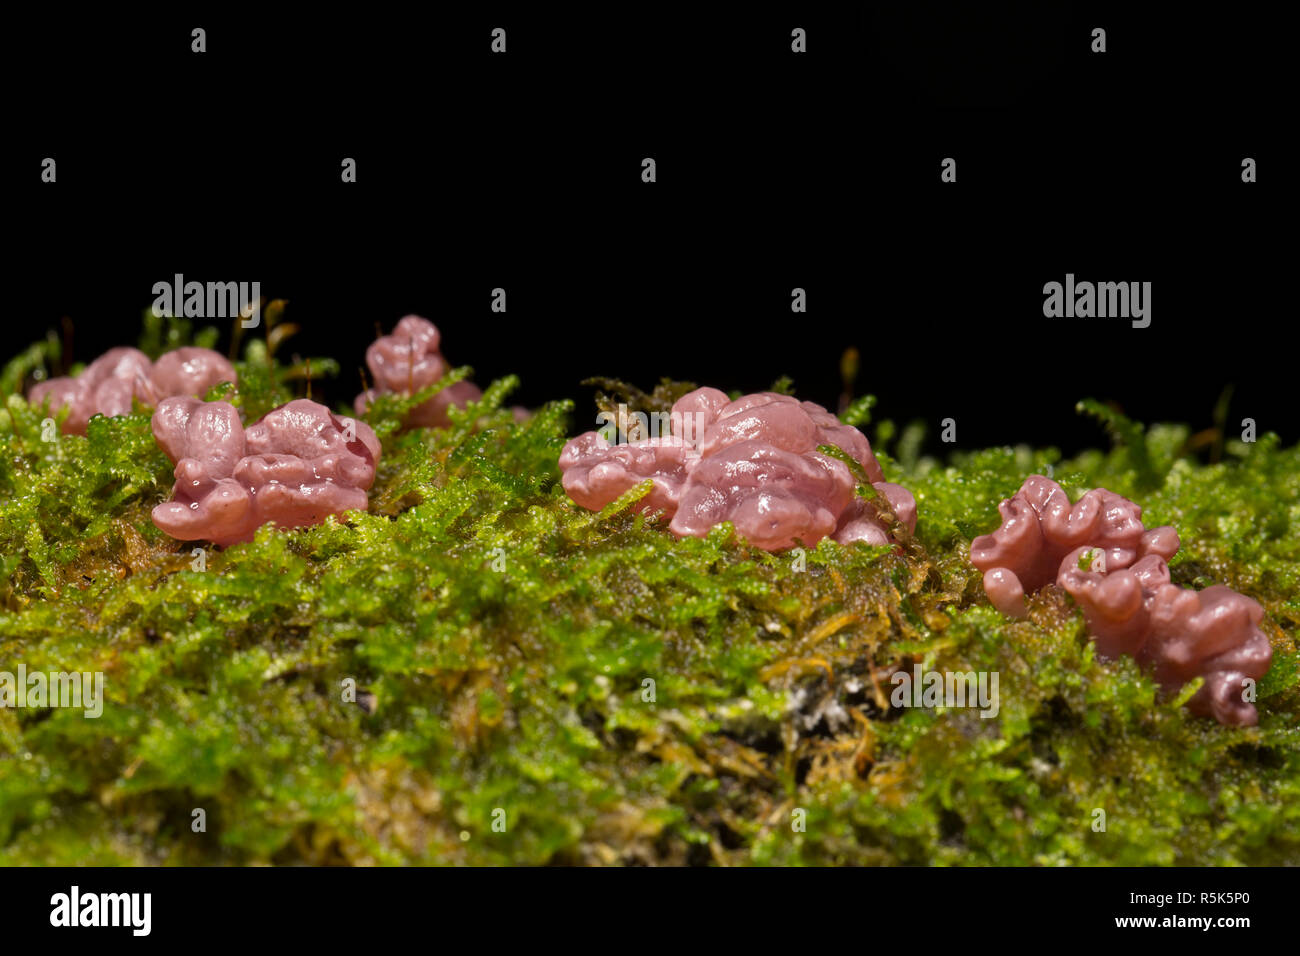 Purple jellydisc fungus, Ascocoryne sarcoides, growing amongst moss on a fallen tree in woodlands in North Dorset England UK GB Stock Photo